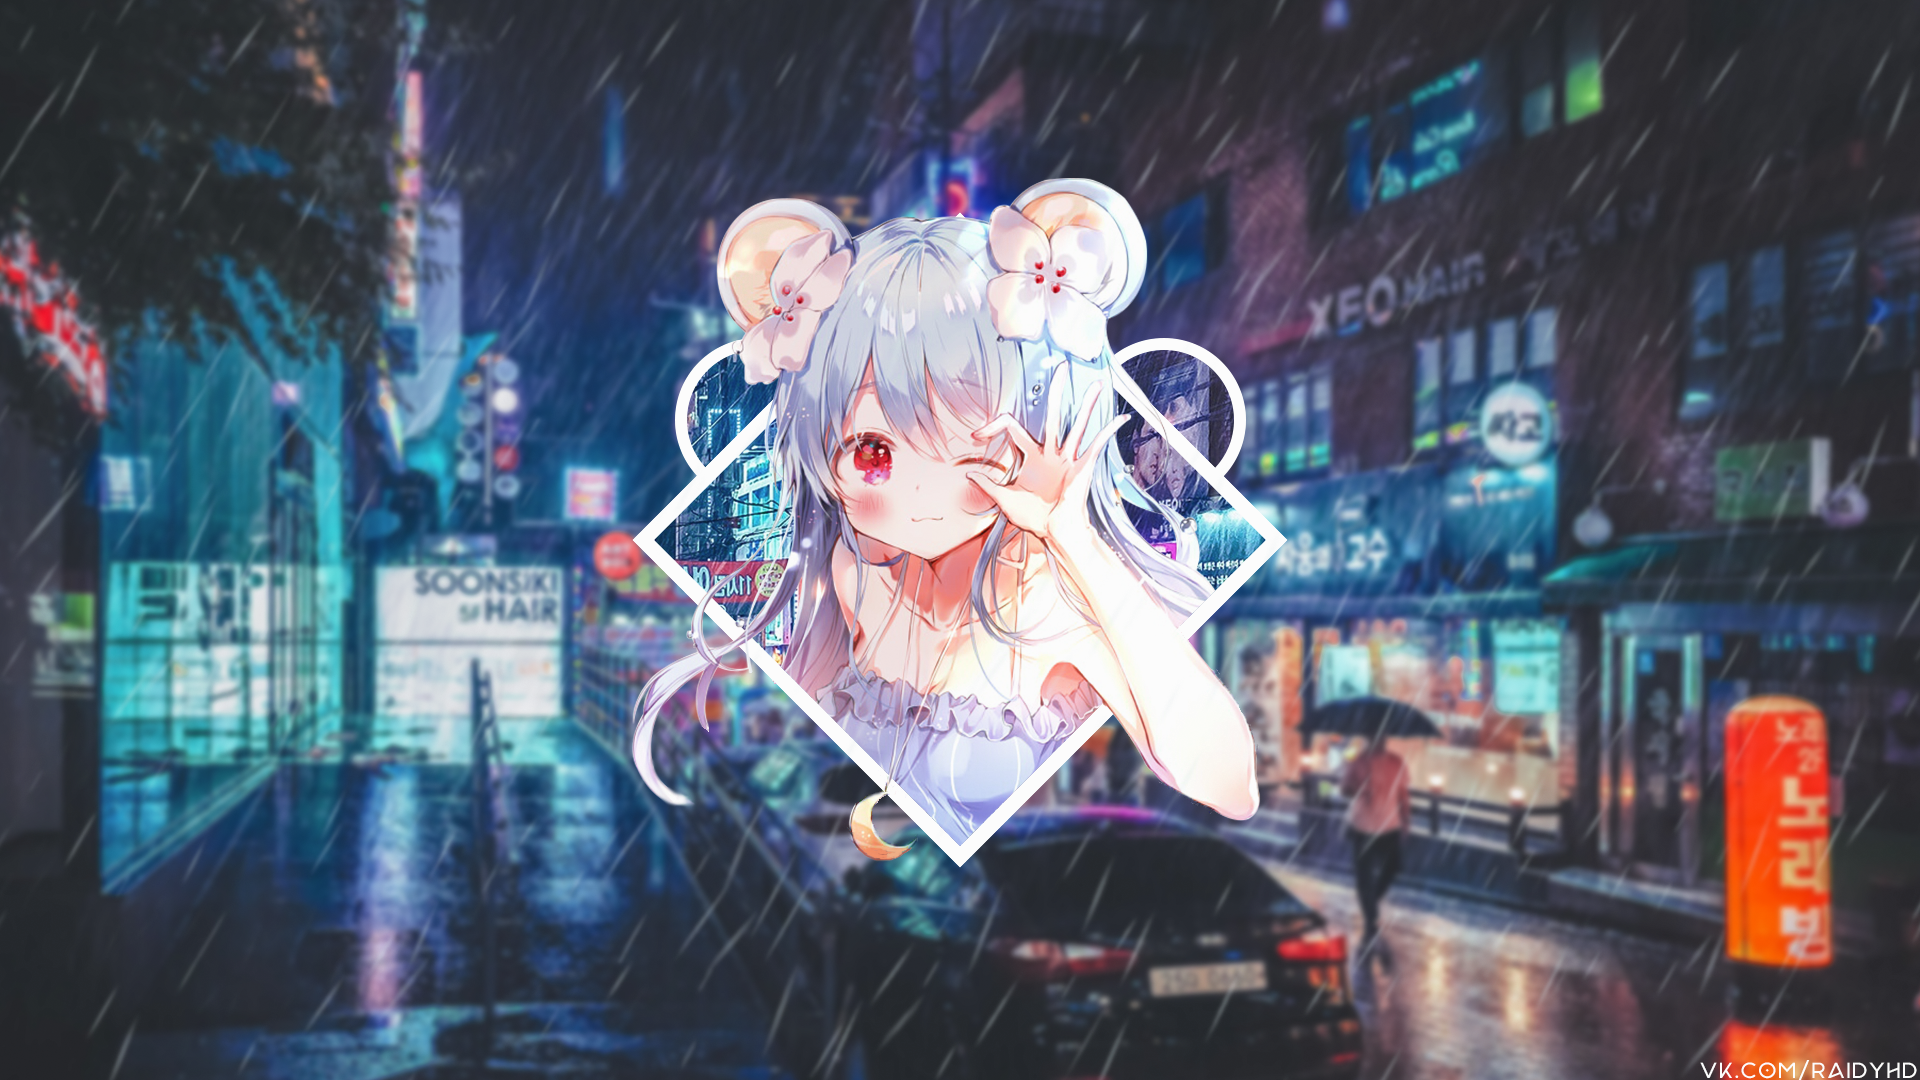 Anime 1920x1080 anime anime girls picture-in-picture road South Korea city neon lights rain cityscape